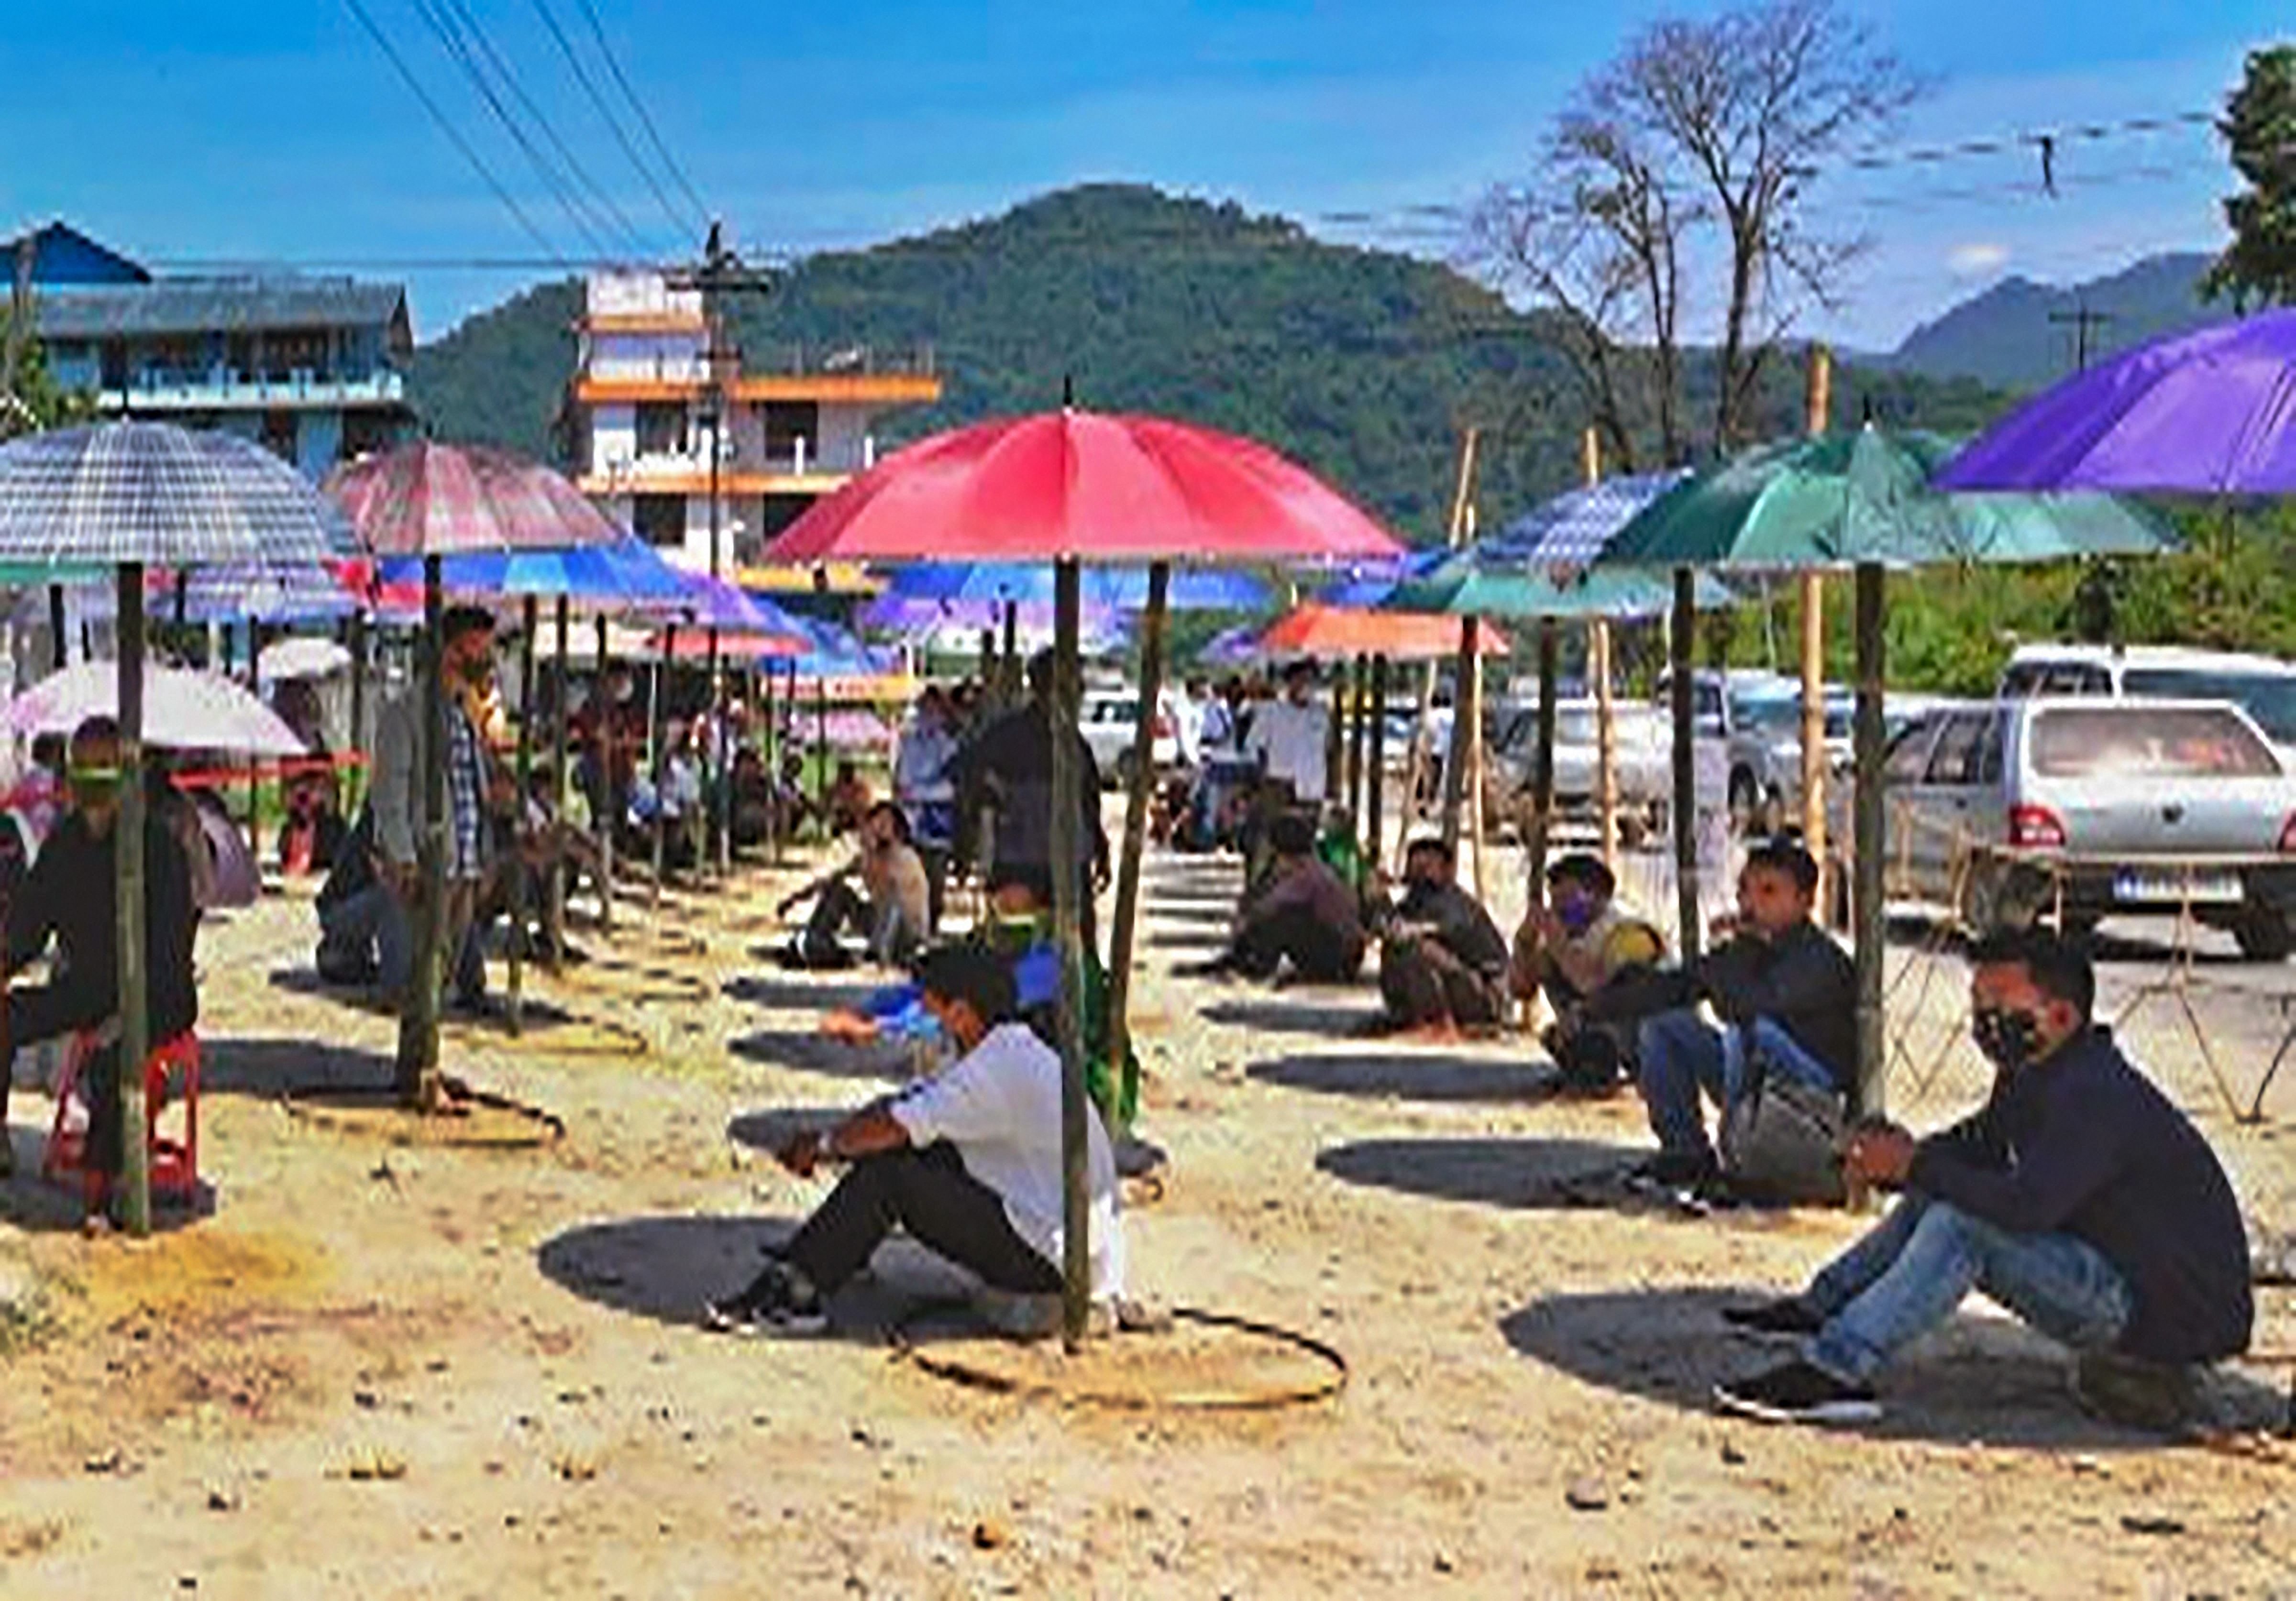 Locals wait under a shed made of garden umbrellas in front of a bank, during the ongoing COVID-19 nationwide lockdown, in West Siang district. (Credit: PTI Photo)